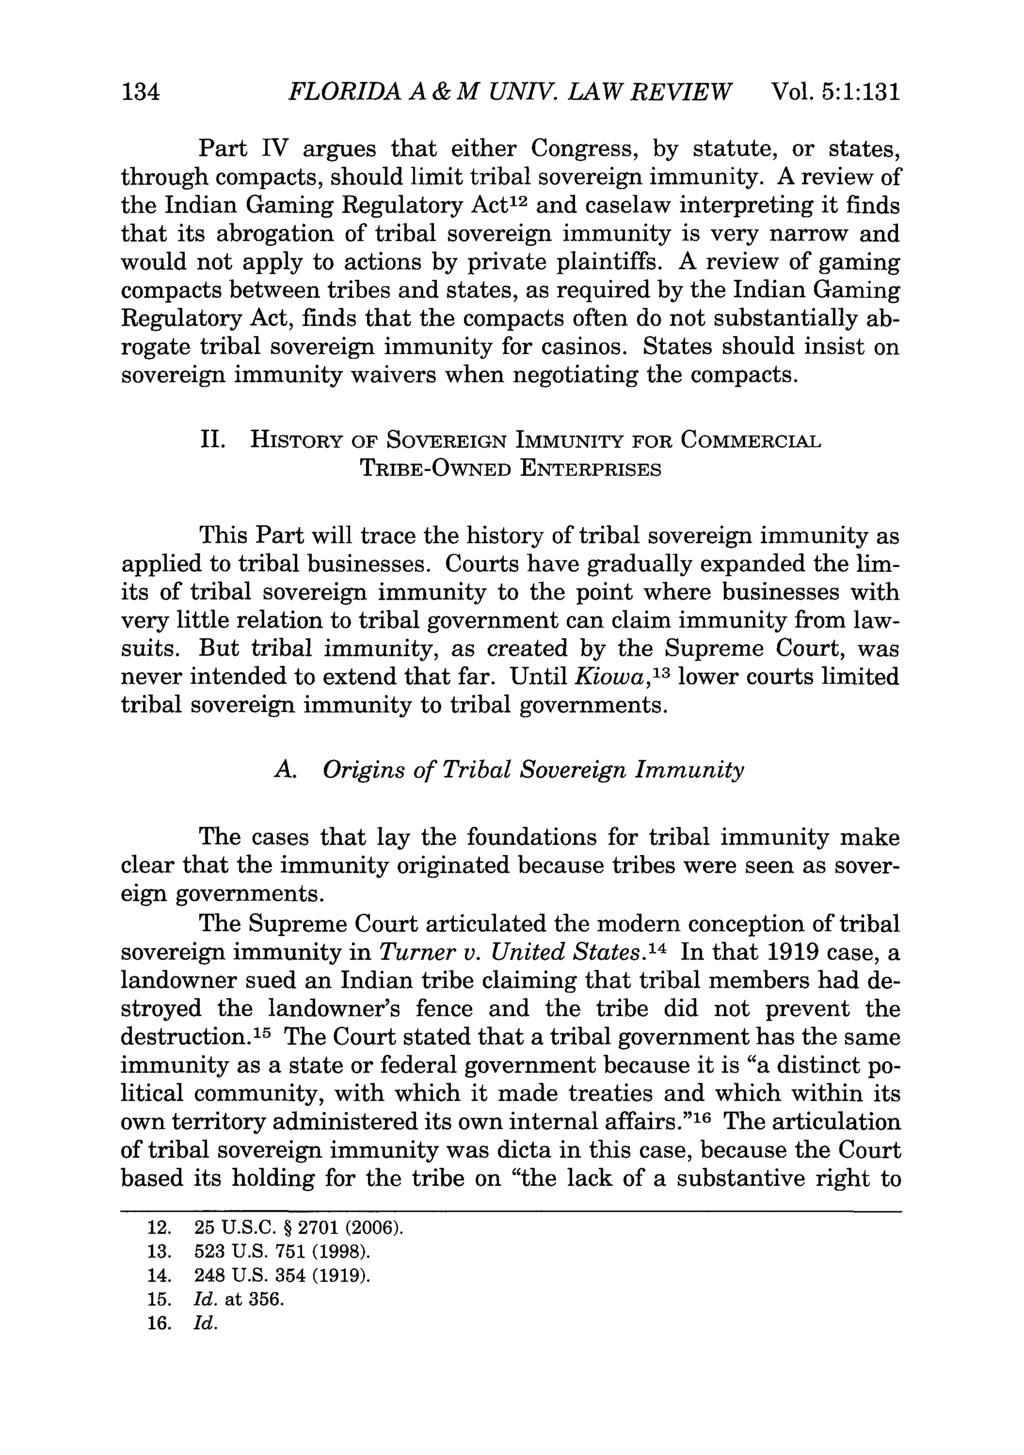 134 FLORIDA A & M UNIV. LAW REVIEW Vol. 5:1:131 Part IV argues that either Congress, by statute, or states, through compacts, should limit tribal sovereign immunity.